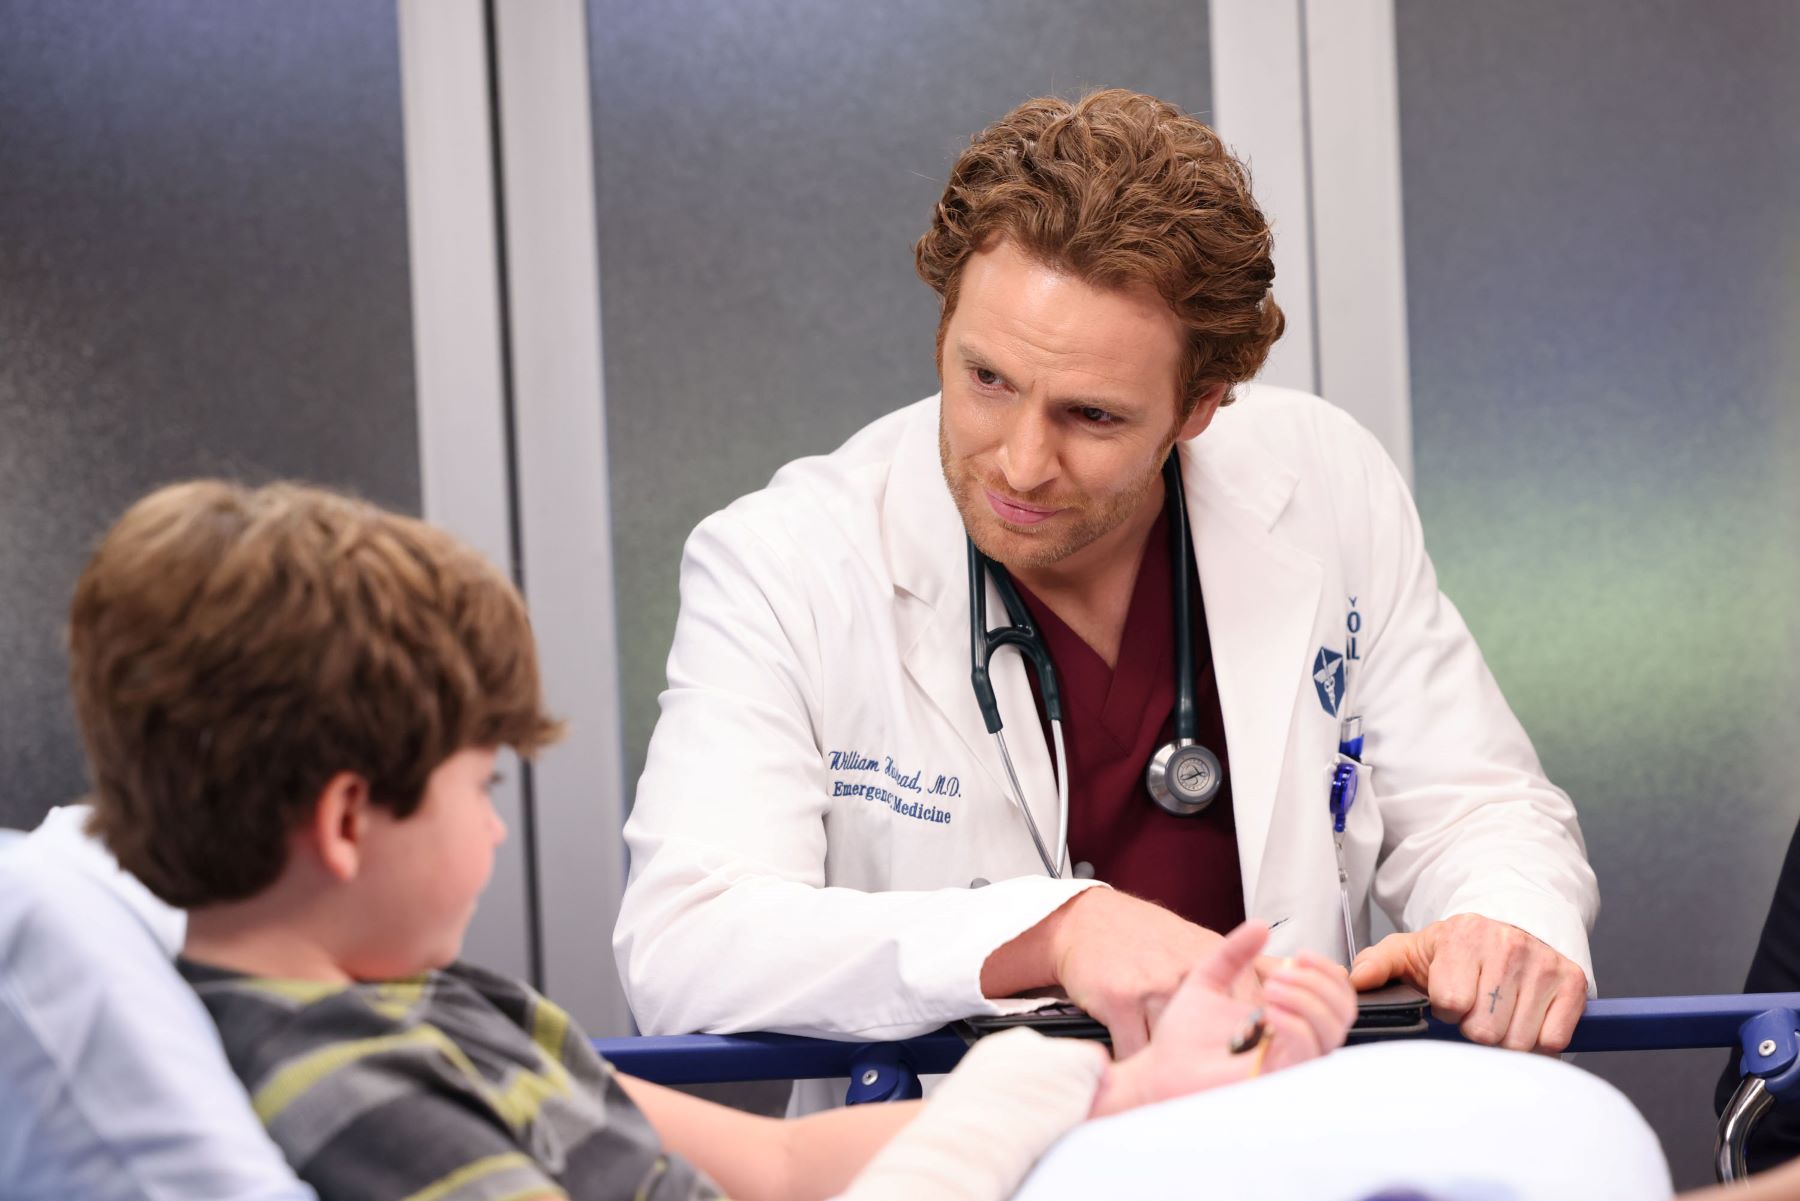 ‘Chicago Med’: Nick Gehlfuss’ Favorite Scene Is in 1 of the Most Hated Episodes